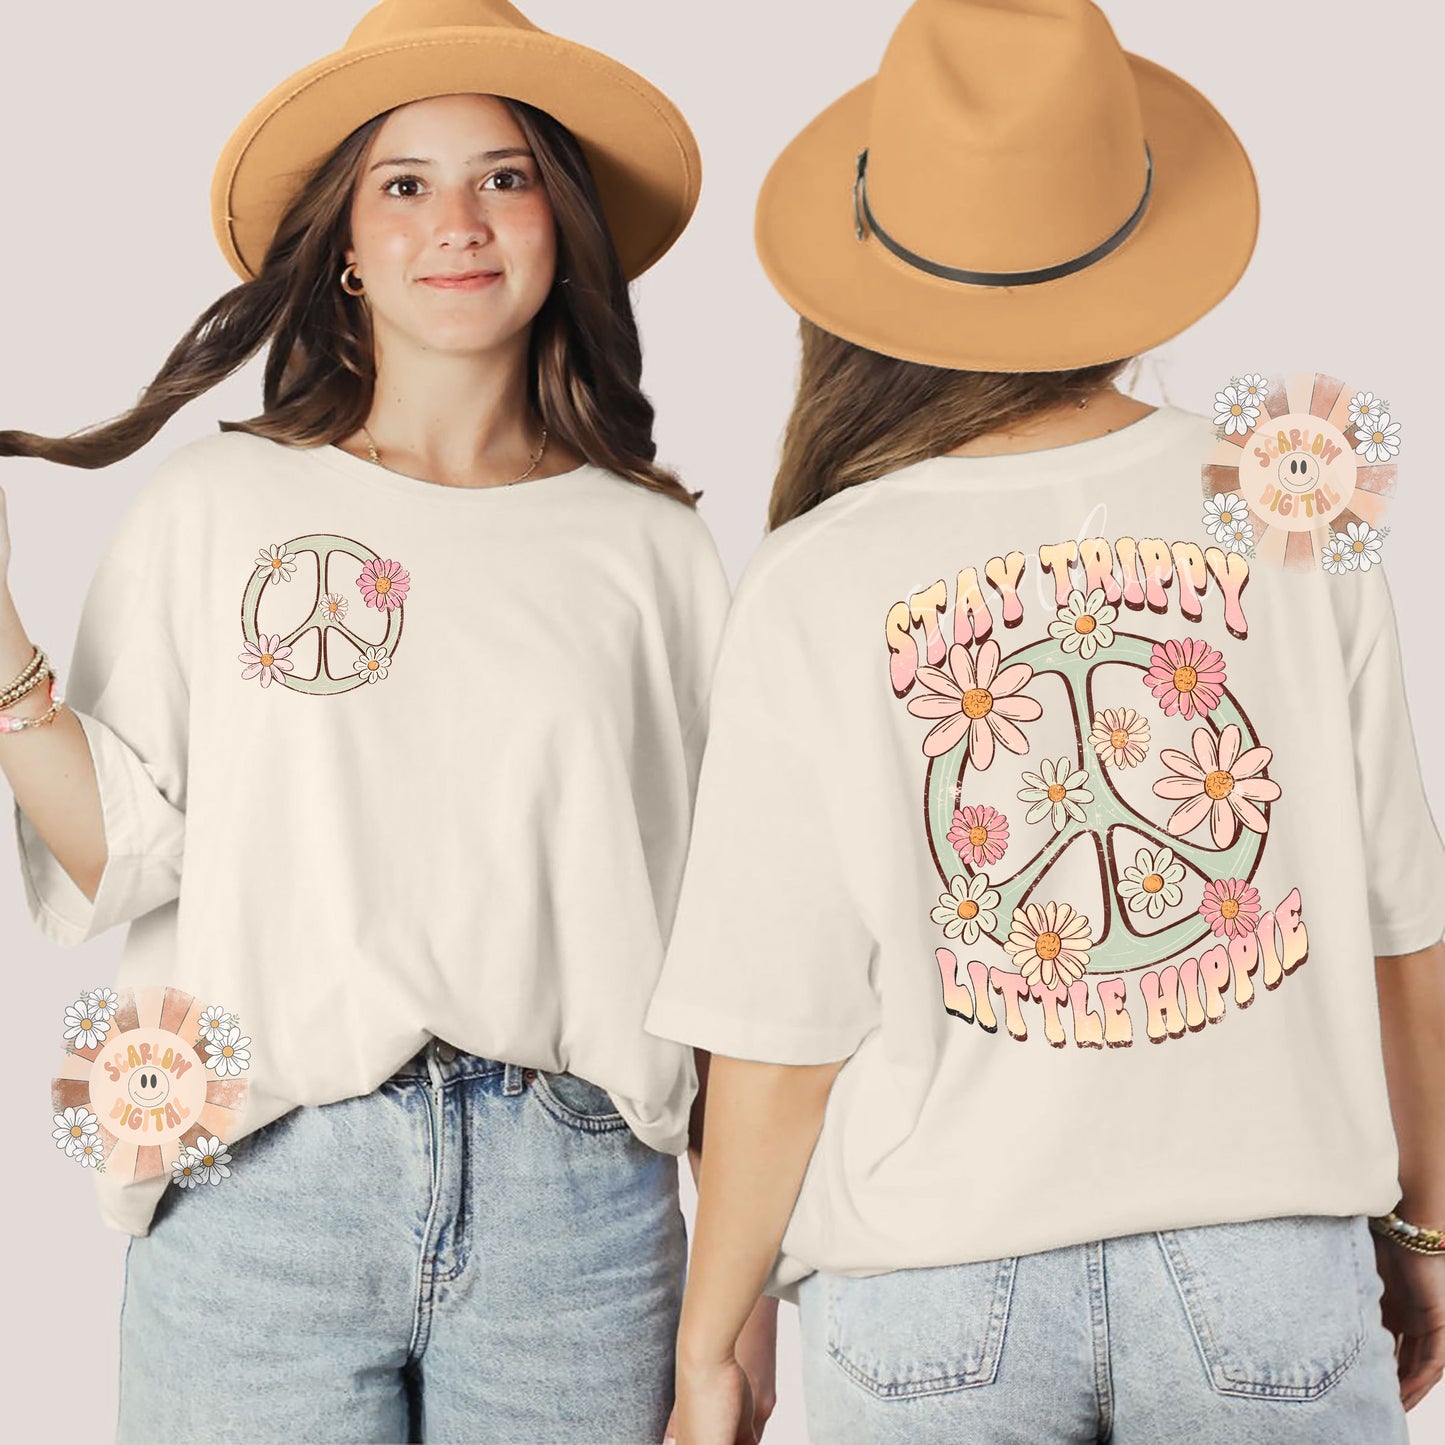 Stay Trippy Little Hippie PNG Front and Back PNG Bundle-Groovy Sublimation Digital Design Download-pocket png, pocket and back png files